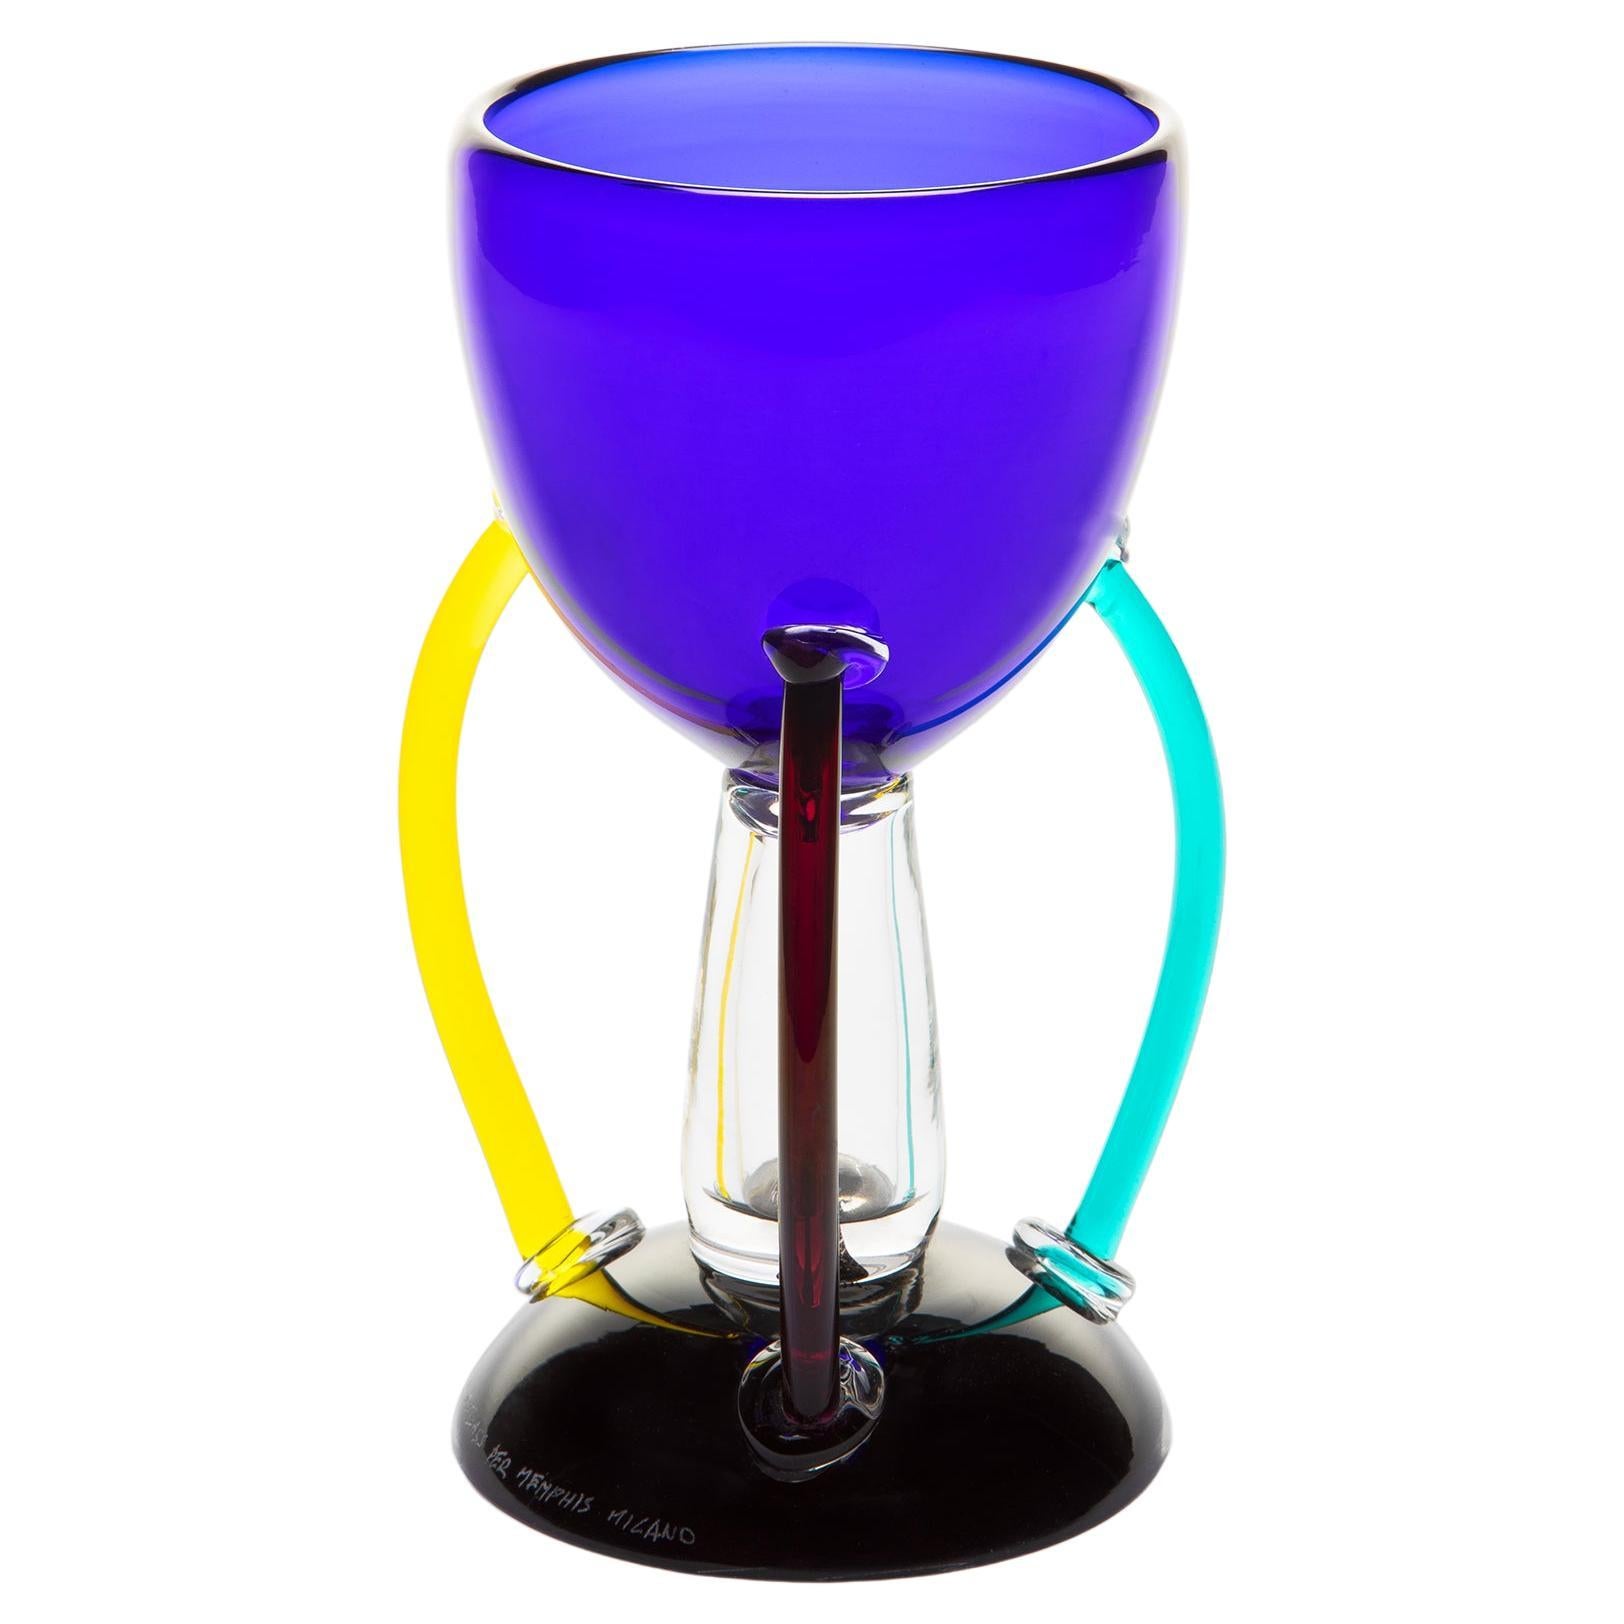 Deneb Glass Vase, by Ettore Sottsass for Memphis Milano Collection